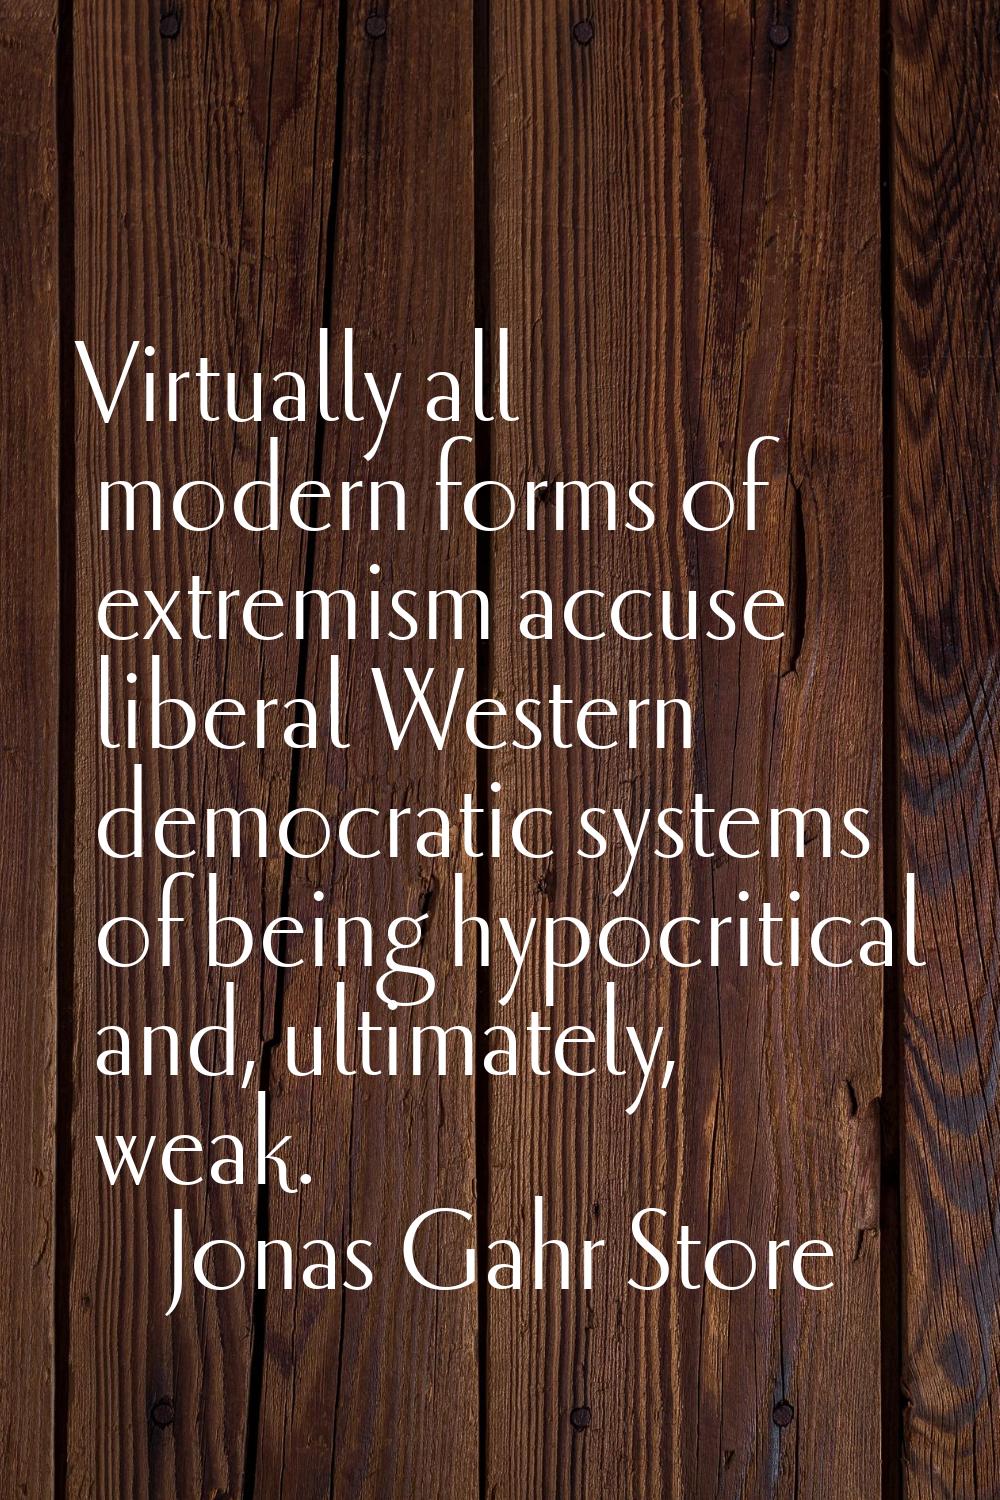 Virtually all modern forms of extremism accuse liberal Western democratic systems of being hypocrit